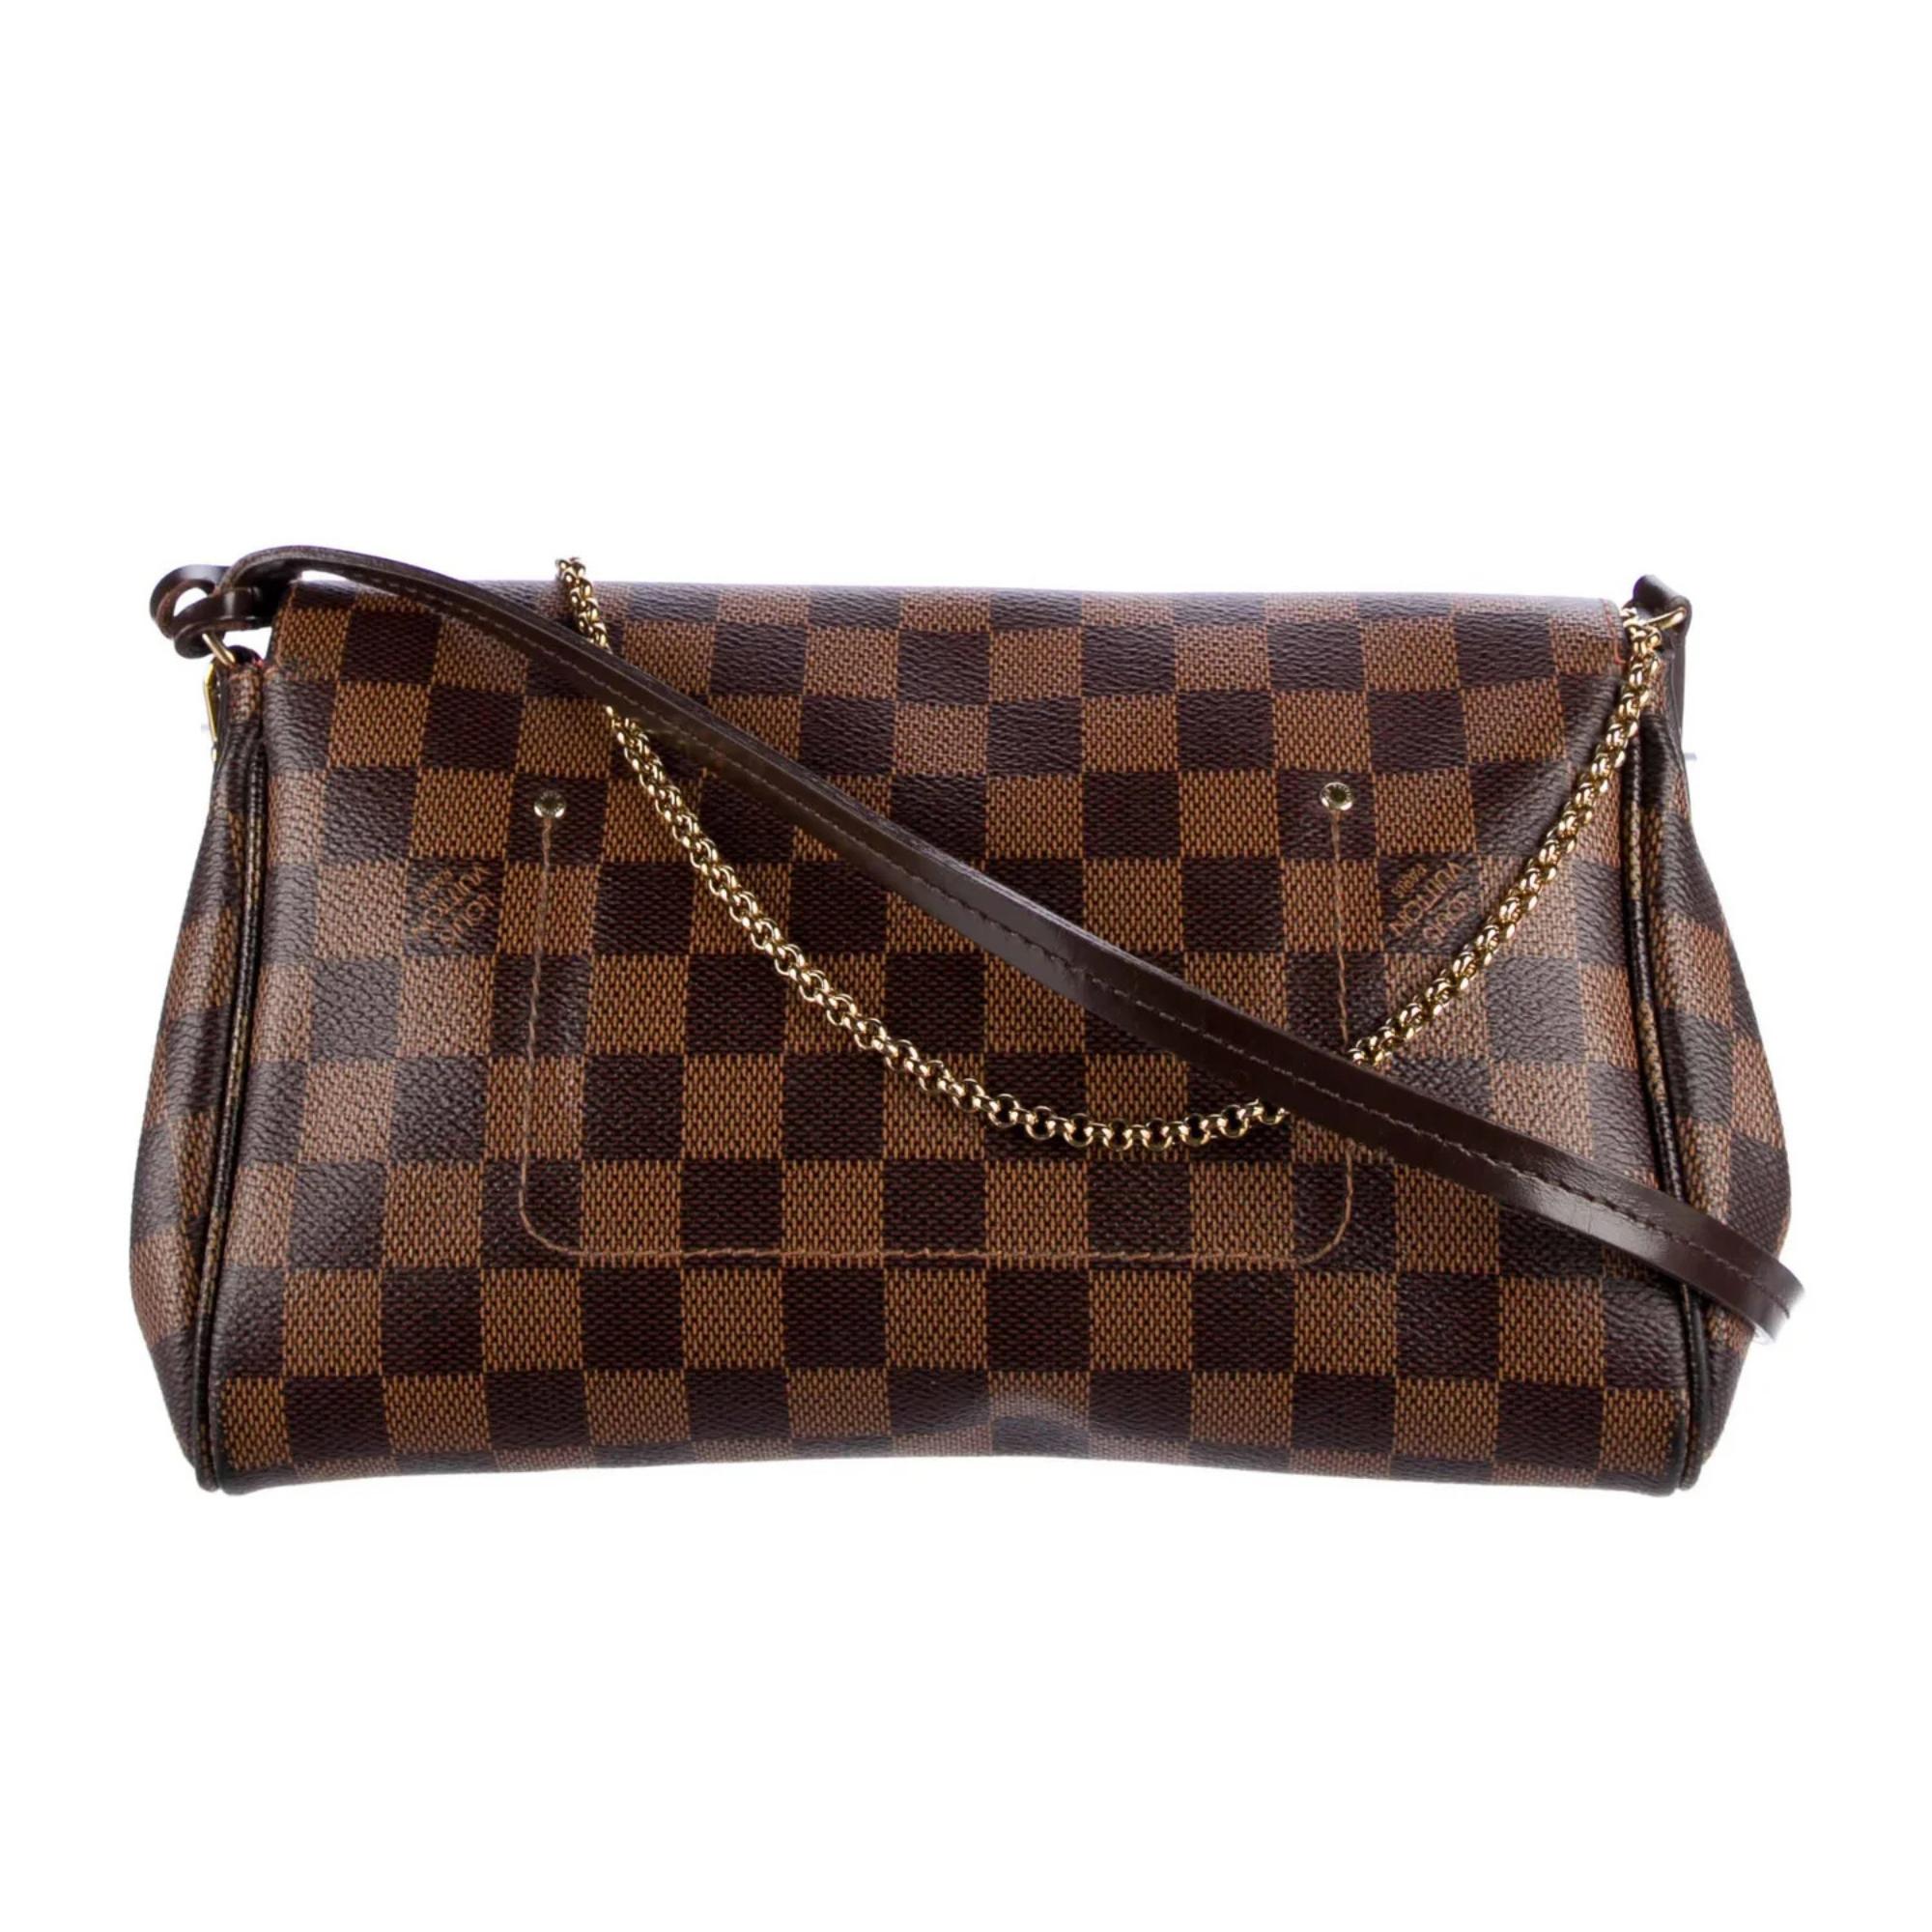 This bag is made of classic Damier toile canvas. The shoulder bag features a polished brass chain-link wristlet strap and an optional brown leather crossbody strap. The crossover flap opens with a magnetic brass bar to a fabric interior with a patch